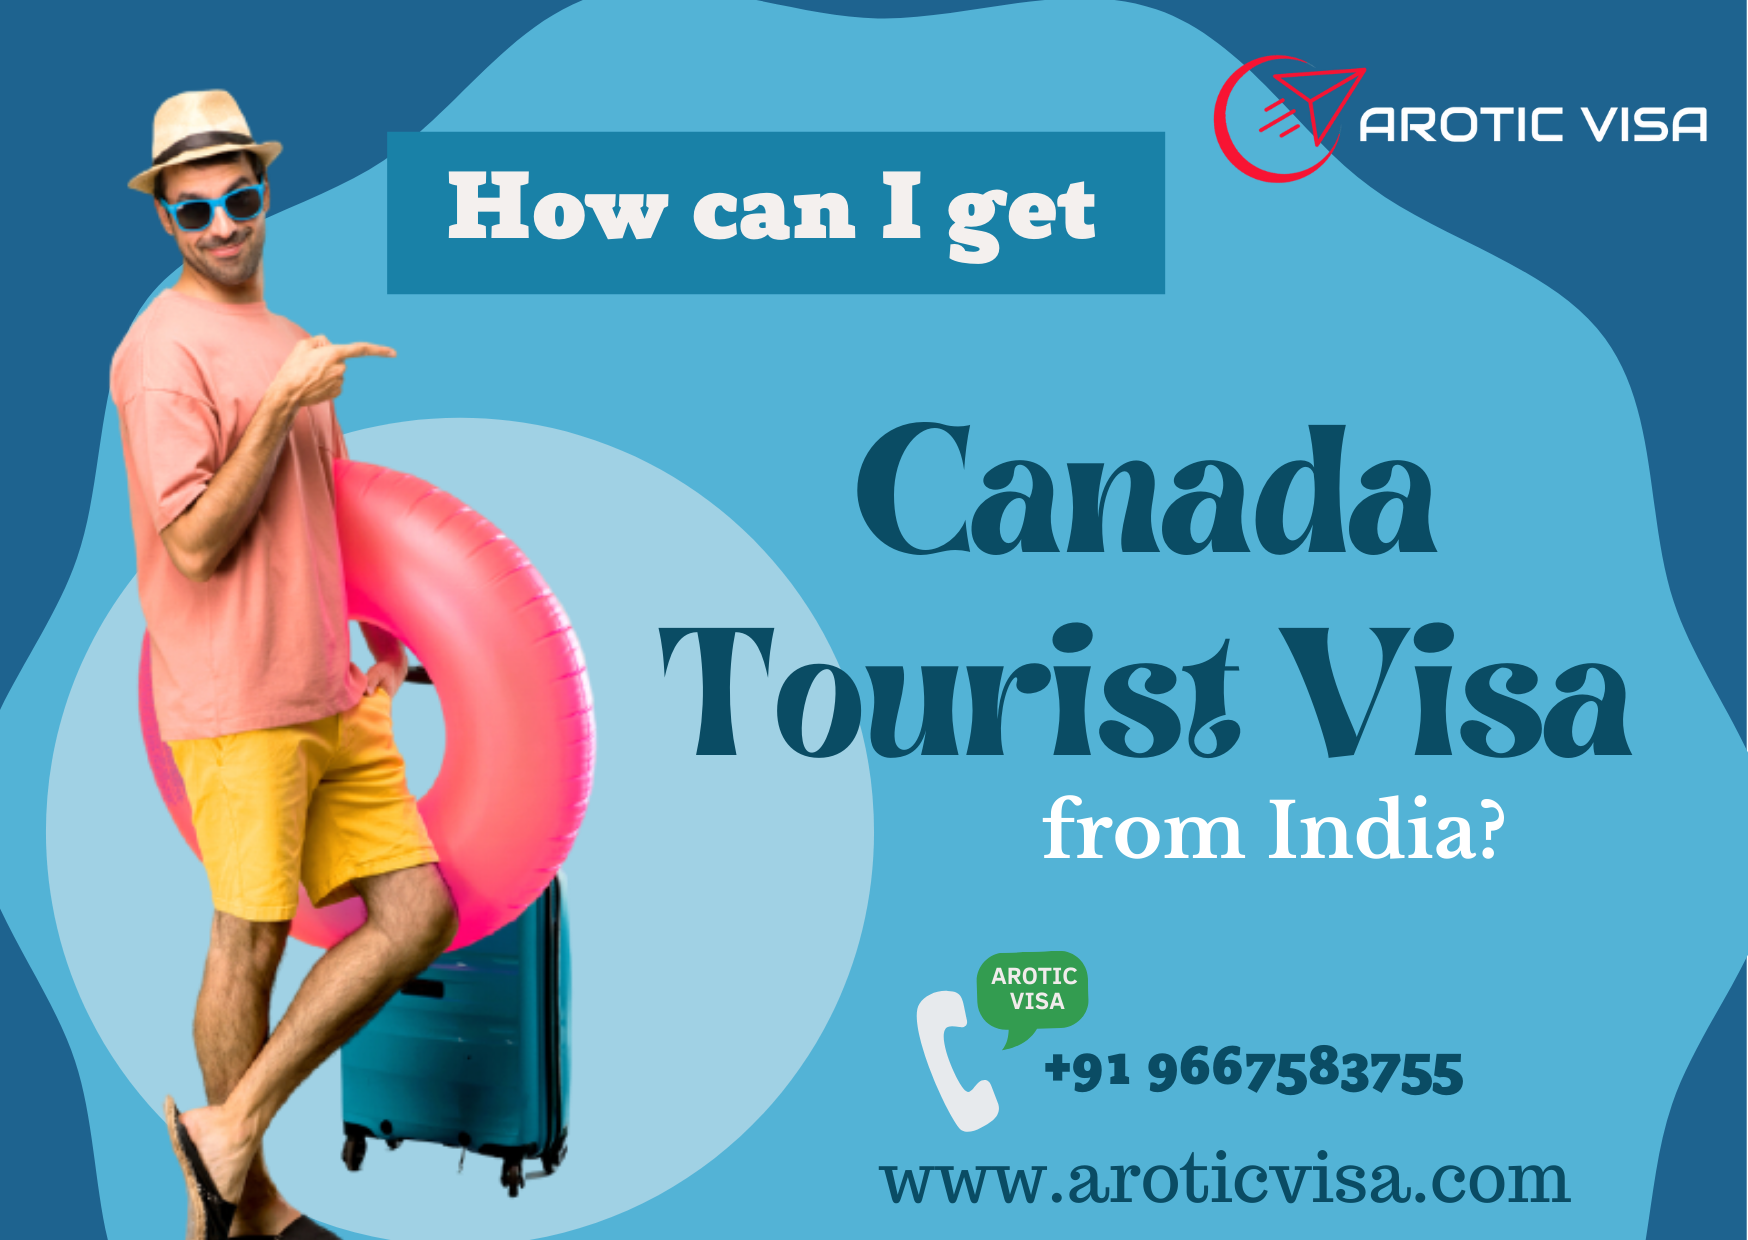 How can I get Canadian tourist visa from India?